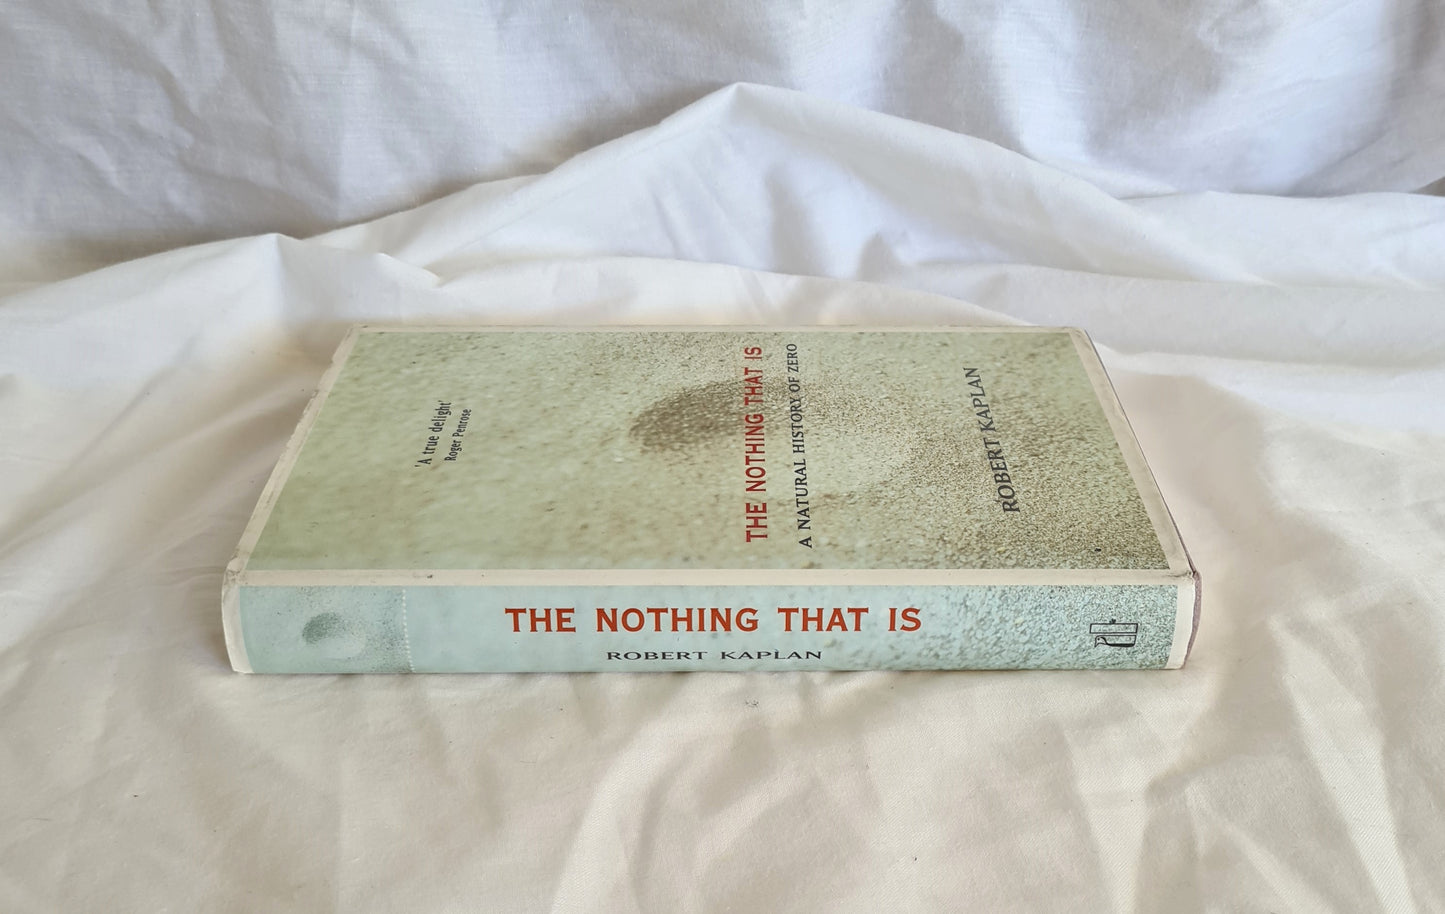 The Nothing That Is by Robert Kaplan